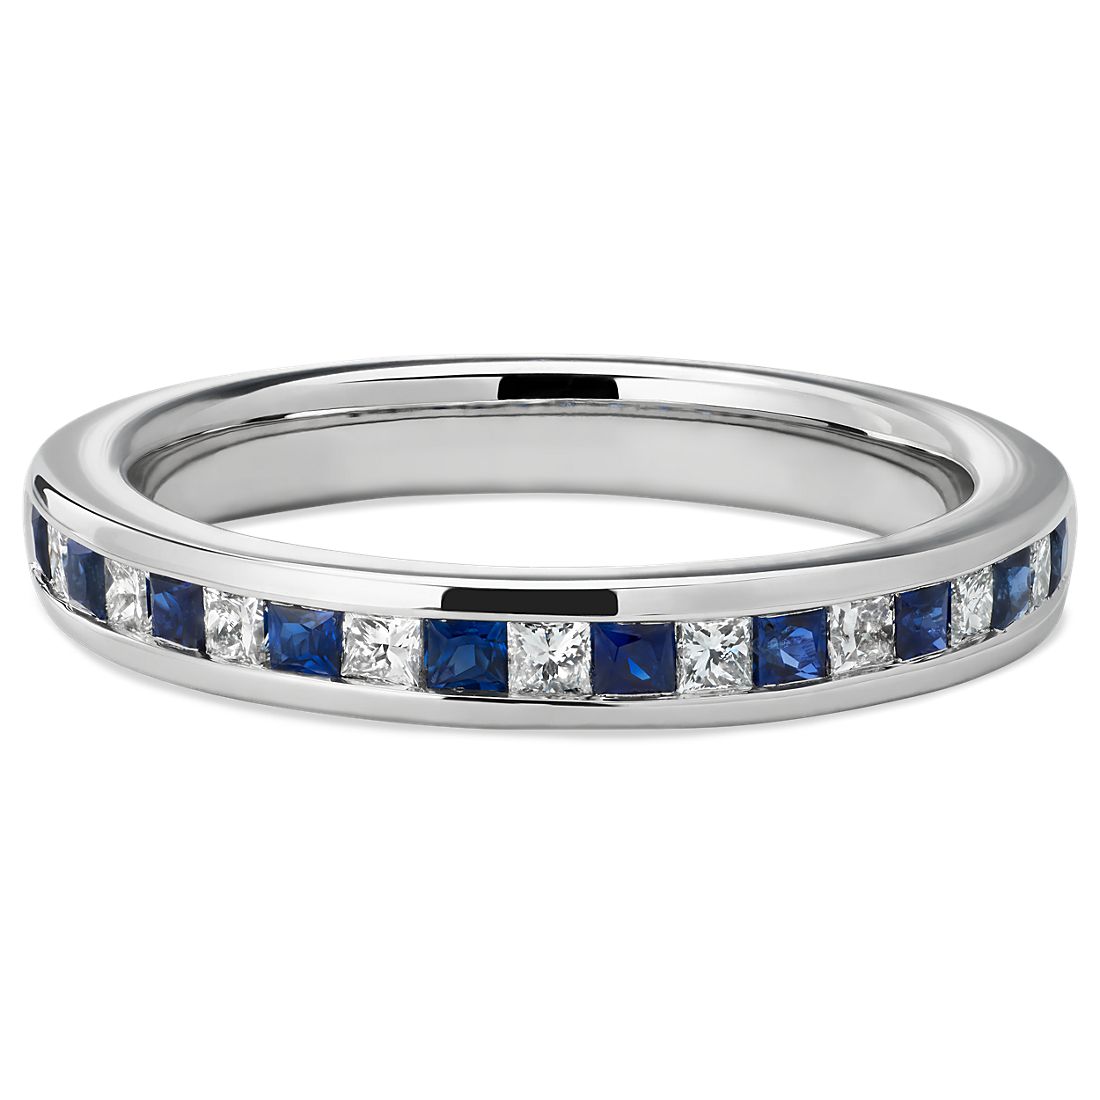 Channel Set Princess Diamond and Blue Sapphire Ring in Platinum (1.5 mm)